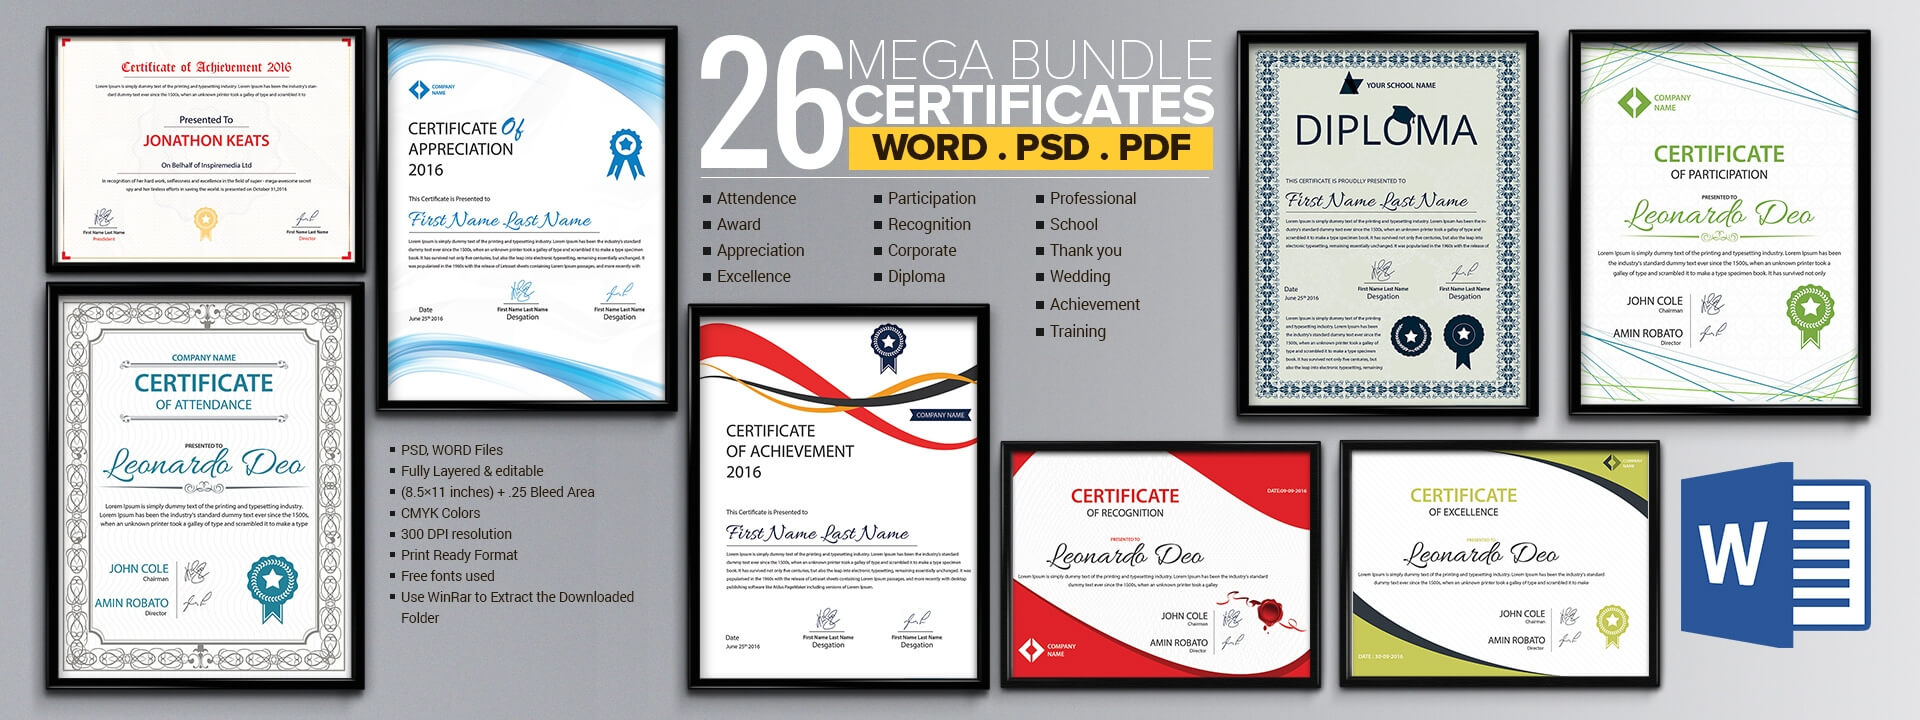 Word Certificate Template - 53+ Free Download Samples For Award Certificate Templates Word 2007